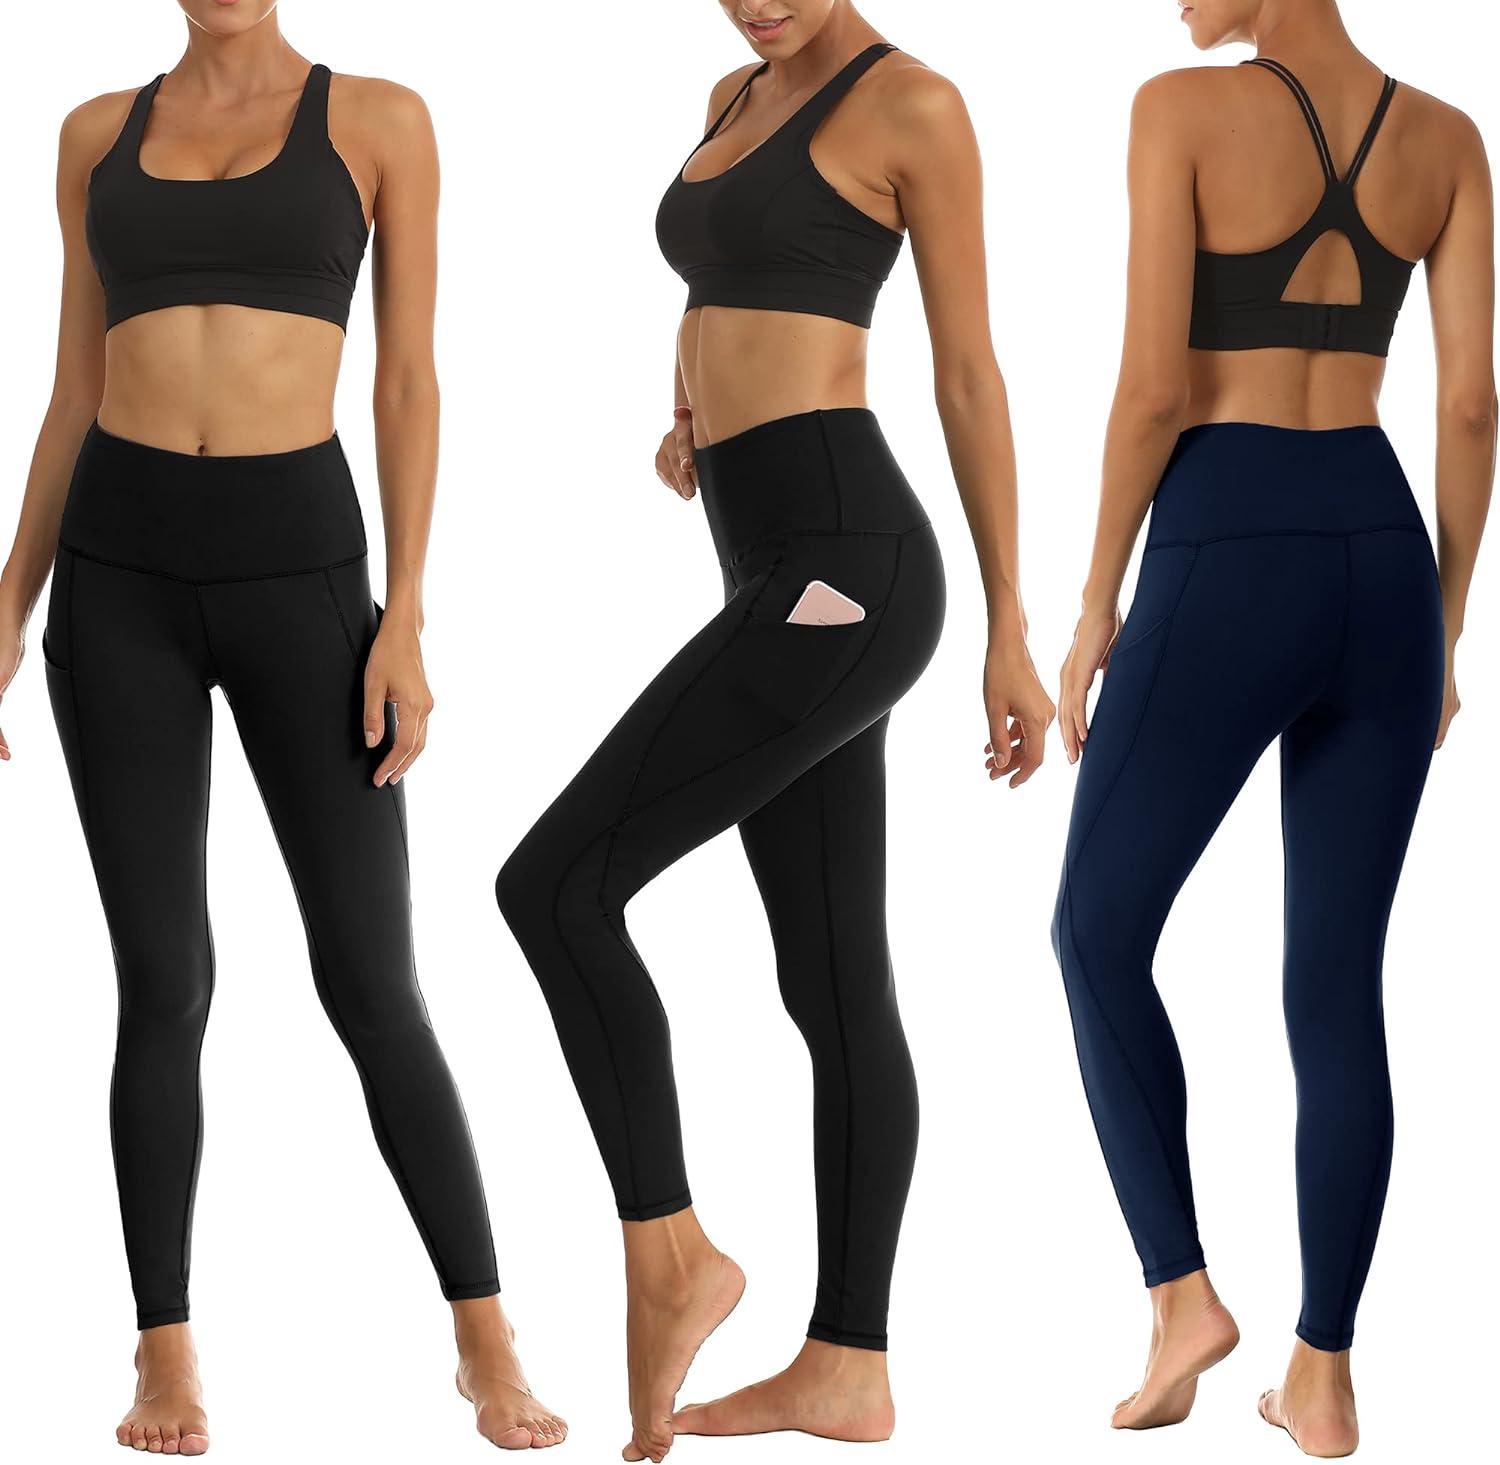 HIGHDAYS 4 Pack Leggings for Women - High Waisted Tummy Control Non-See  Through Womens Workout Running Legging Yoga Pants